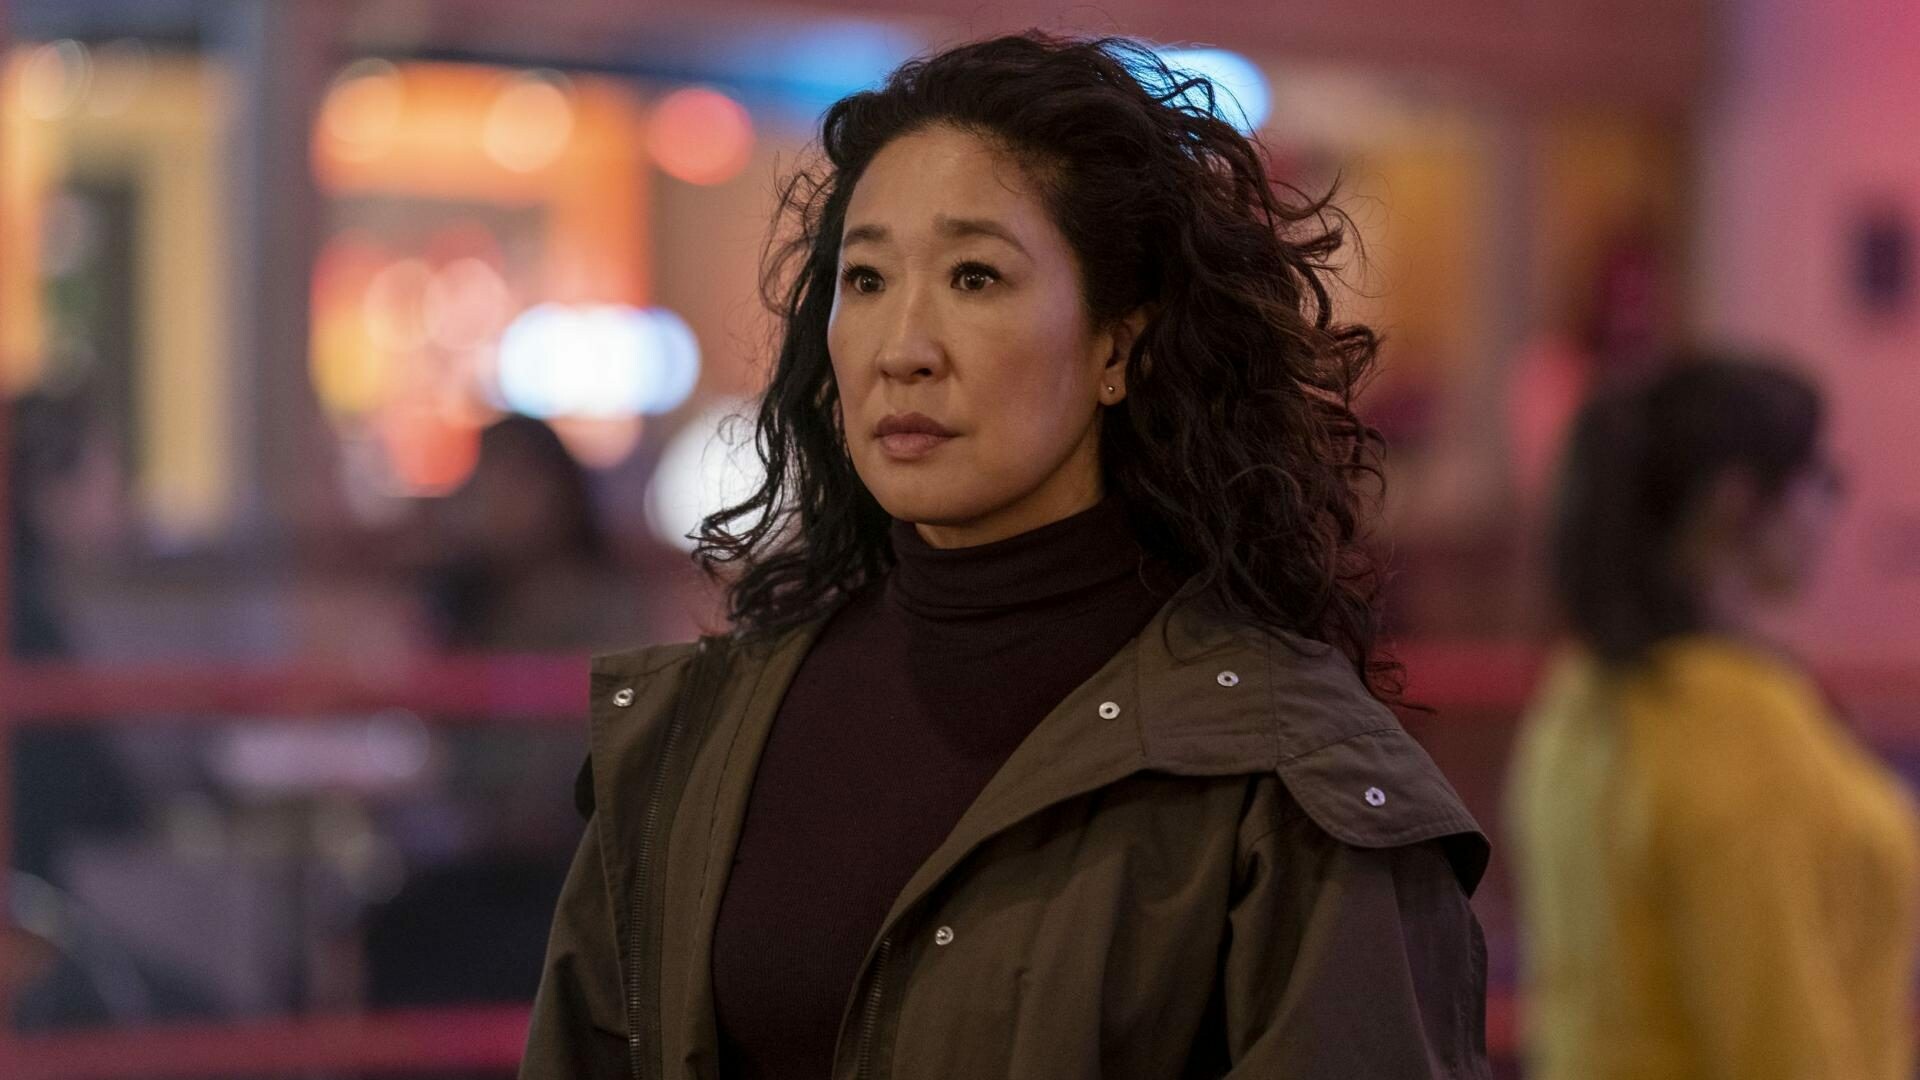 Killing Eve: Sandra Oh was the first to be cast in June 2017, as the title character. 1920x1080 Full HD Background.